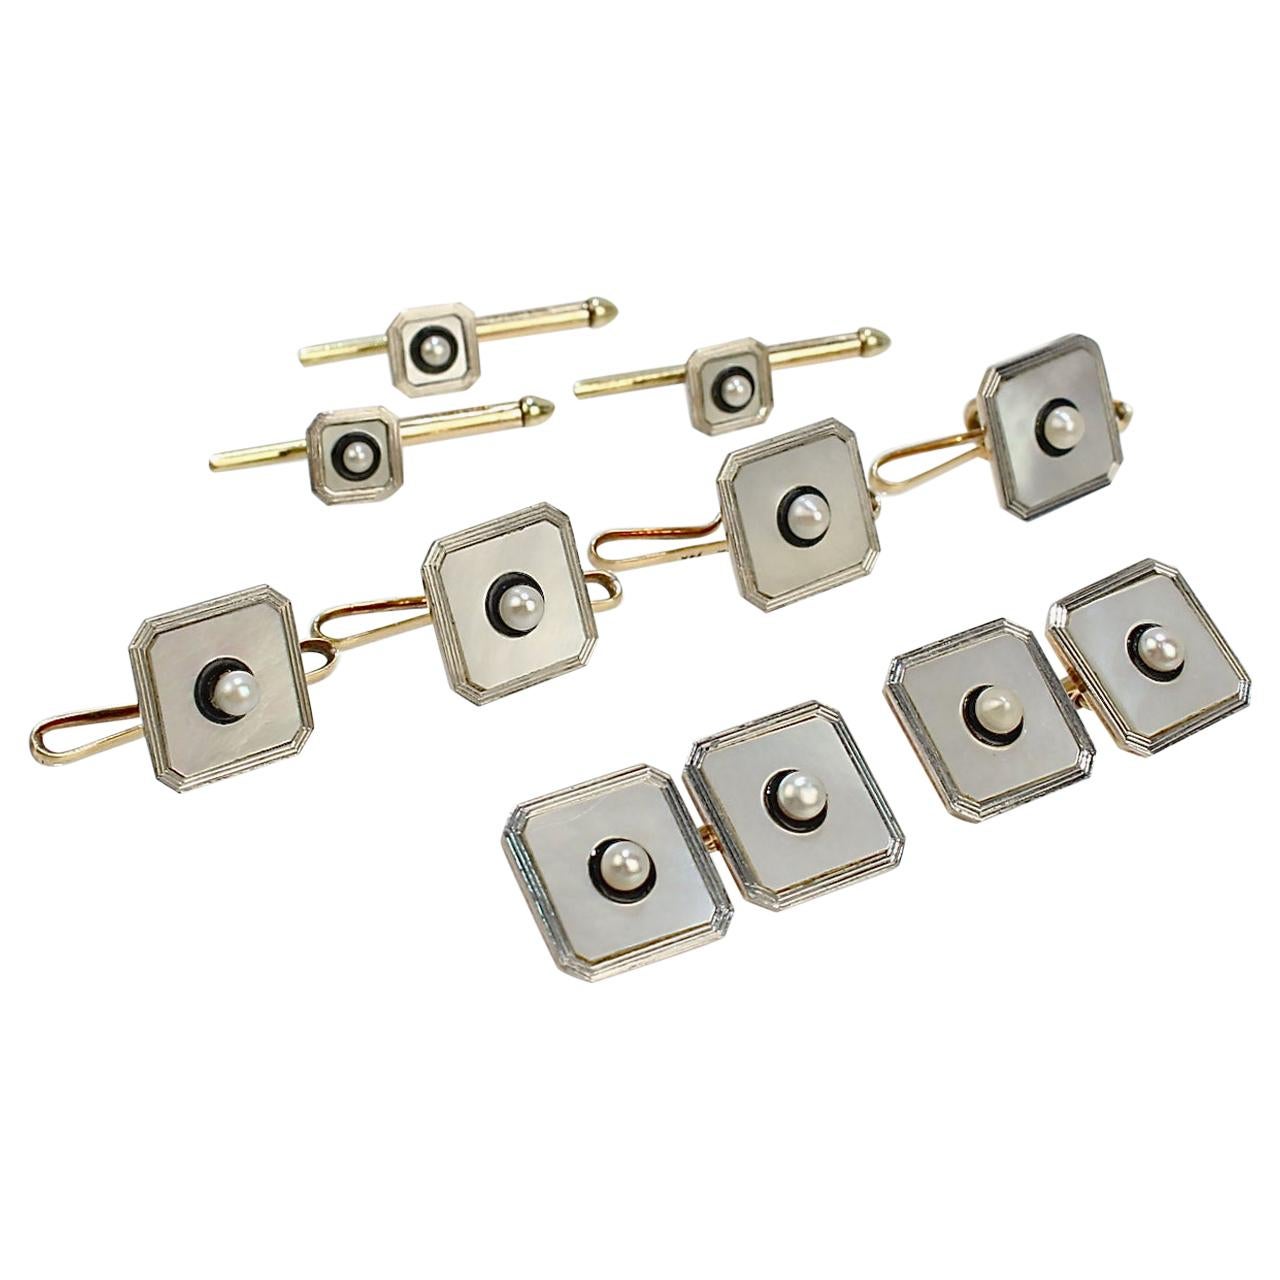 Tiffany & Co Art Deco Cufflink Dress Set in 14K Gold & Platinum with Seed Pearls